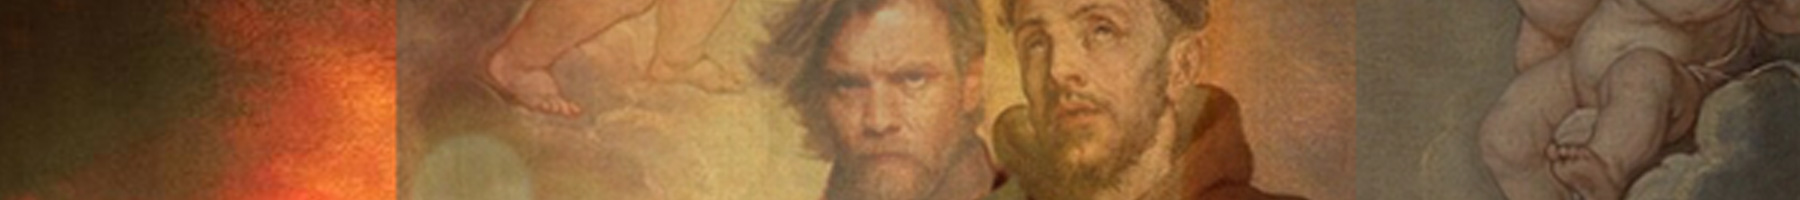 overlaid image of a jedi knight and St Francis